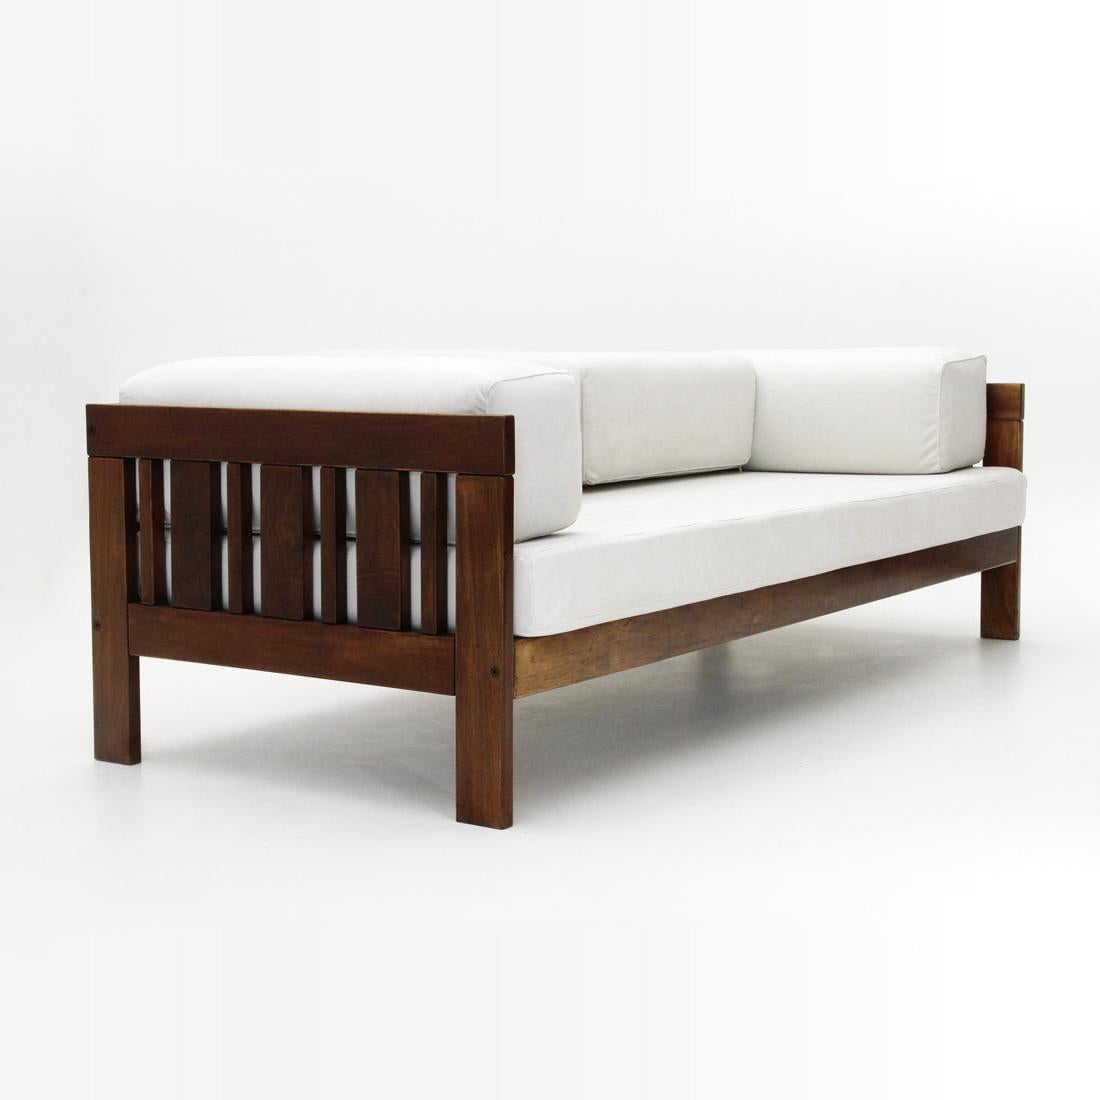 Sofa bed produced in the 1960s by Poltronova based on a project by Ettore Sottsass.
Structure in veneered wood.
Seat made up of padded mattress lined with new velvet fabric.
Back and armrests formed by rectangular shaped cushions lined with new